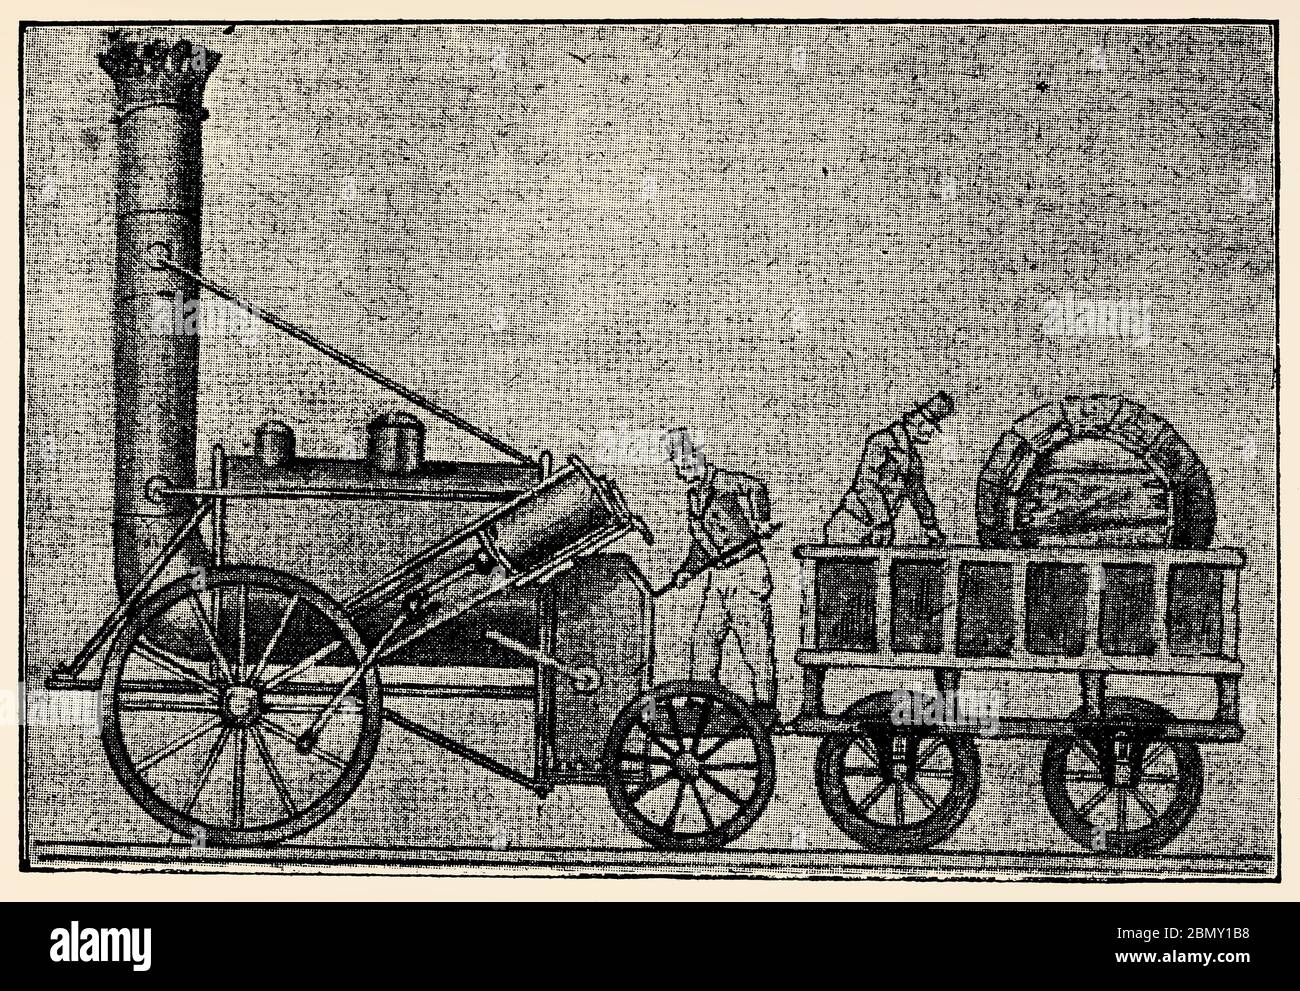 The first steam locomotive - Rocket was built by the pioneering railway engineers George and Robert Stephenson. Stock Photo